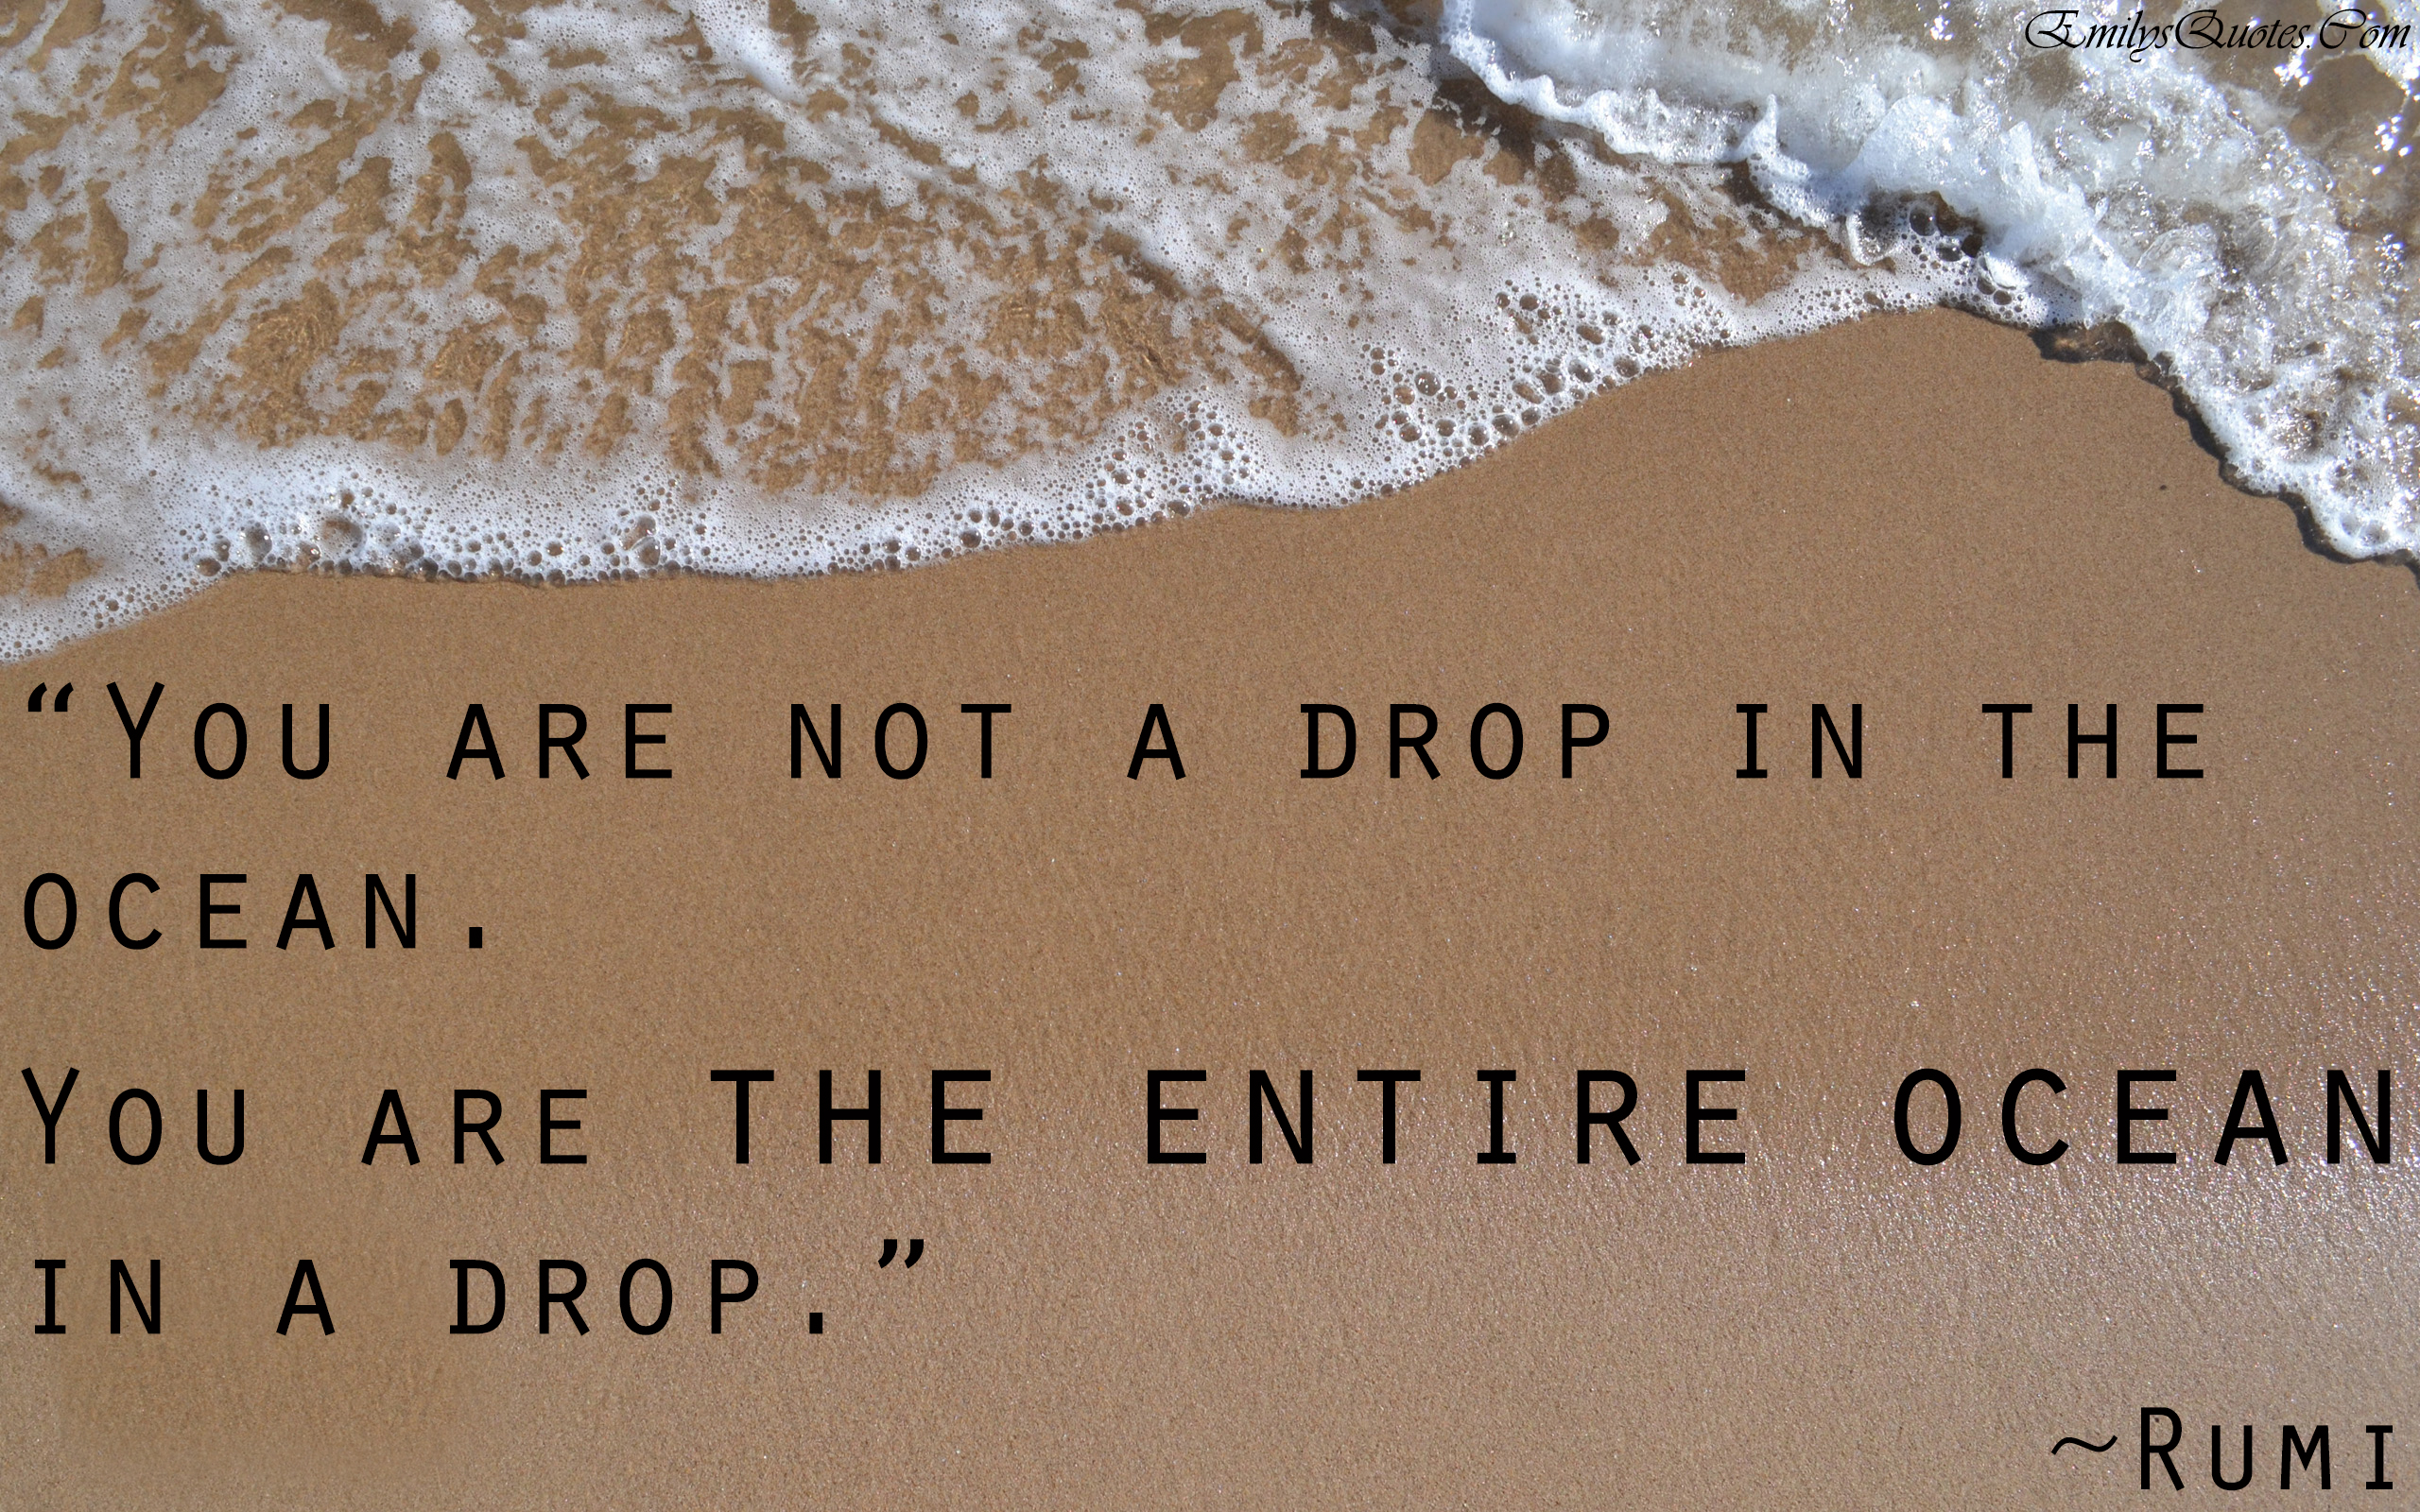 You are not a drop in the ocean. You are the entire ocean in a drop.